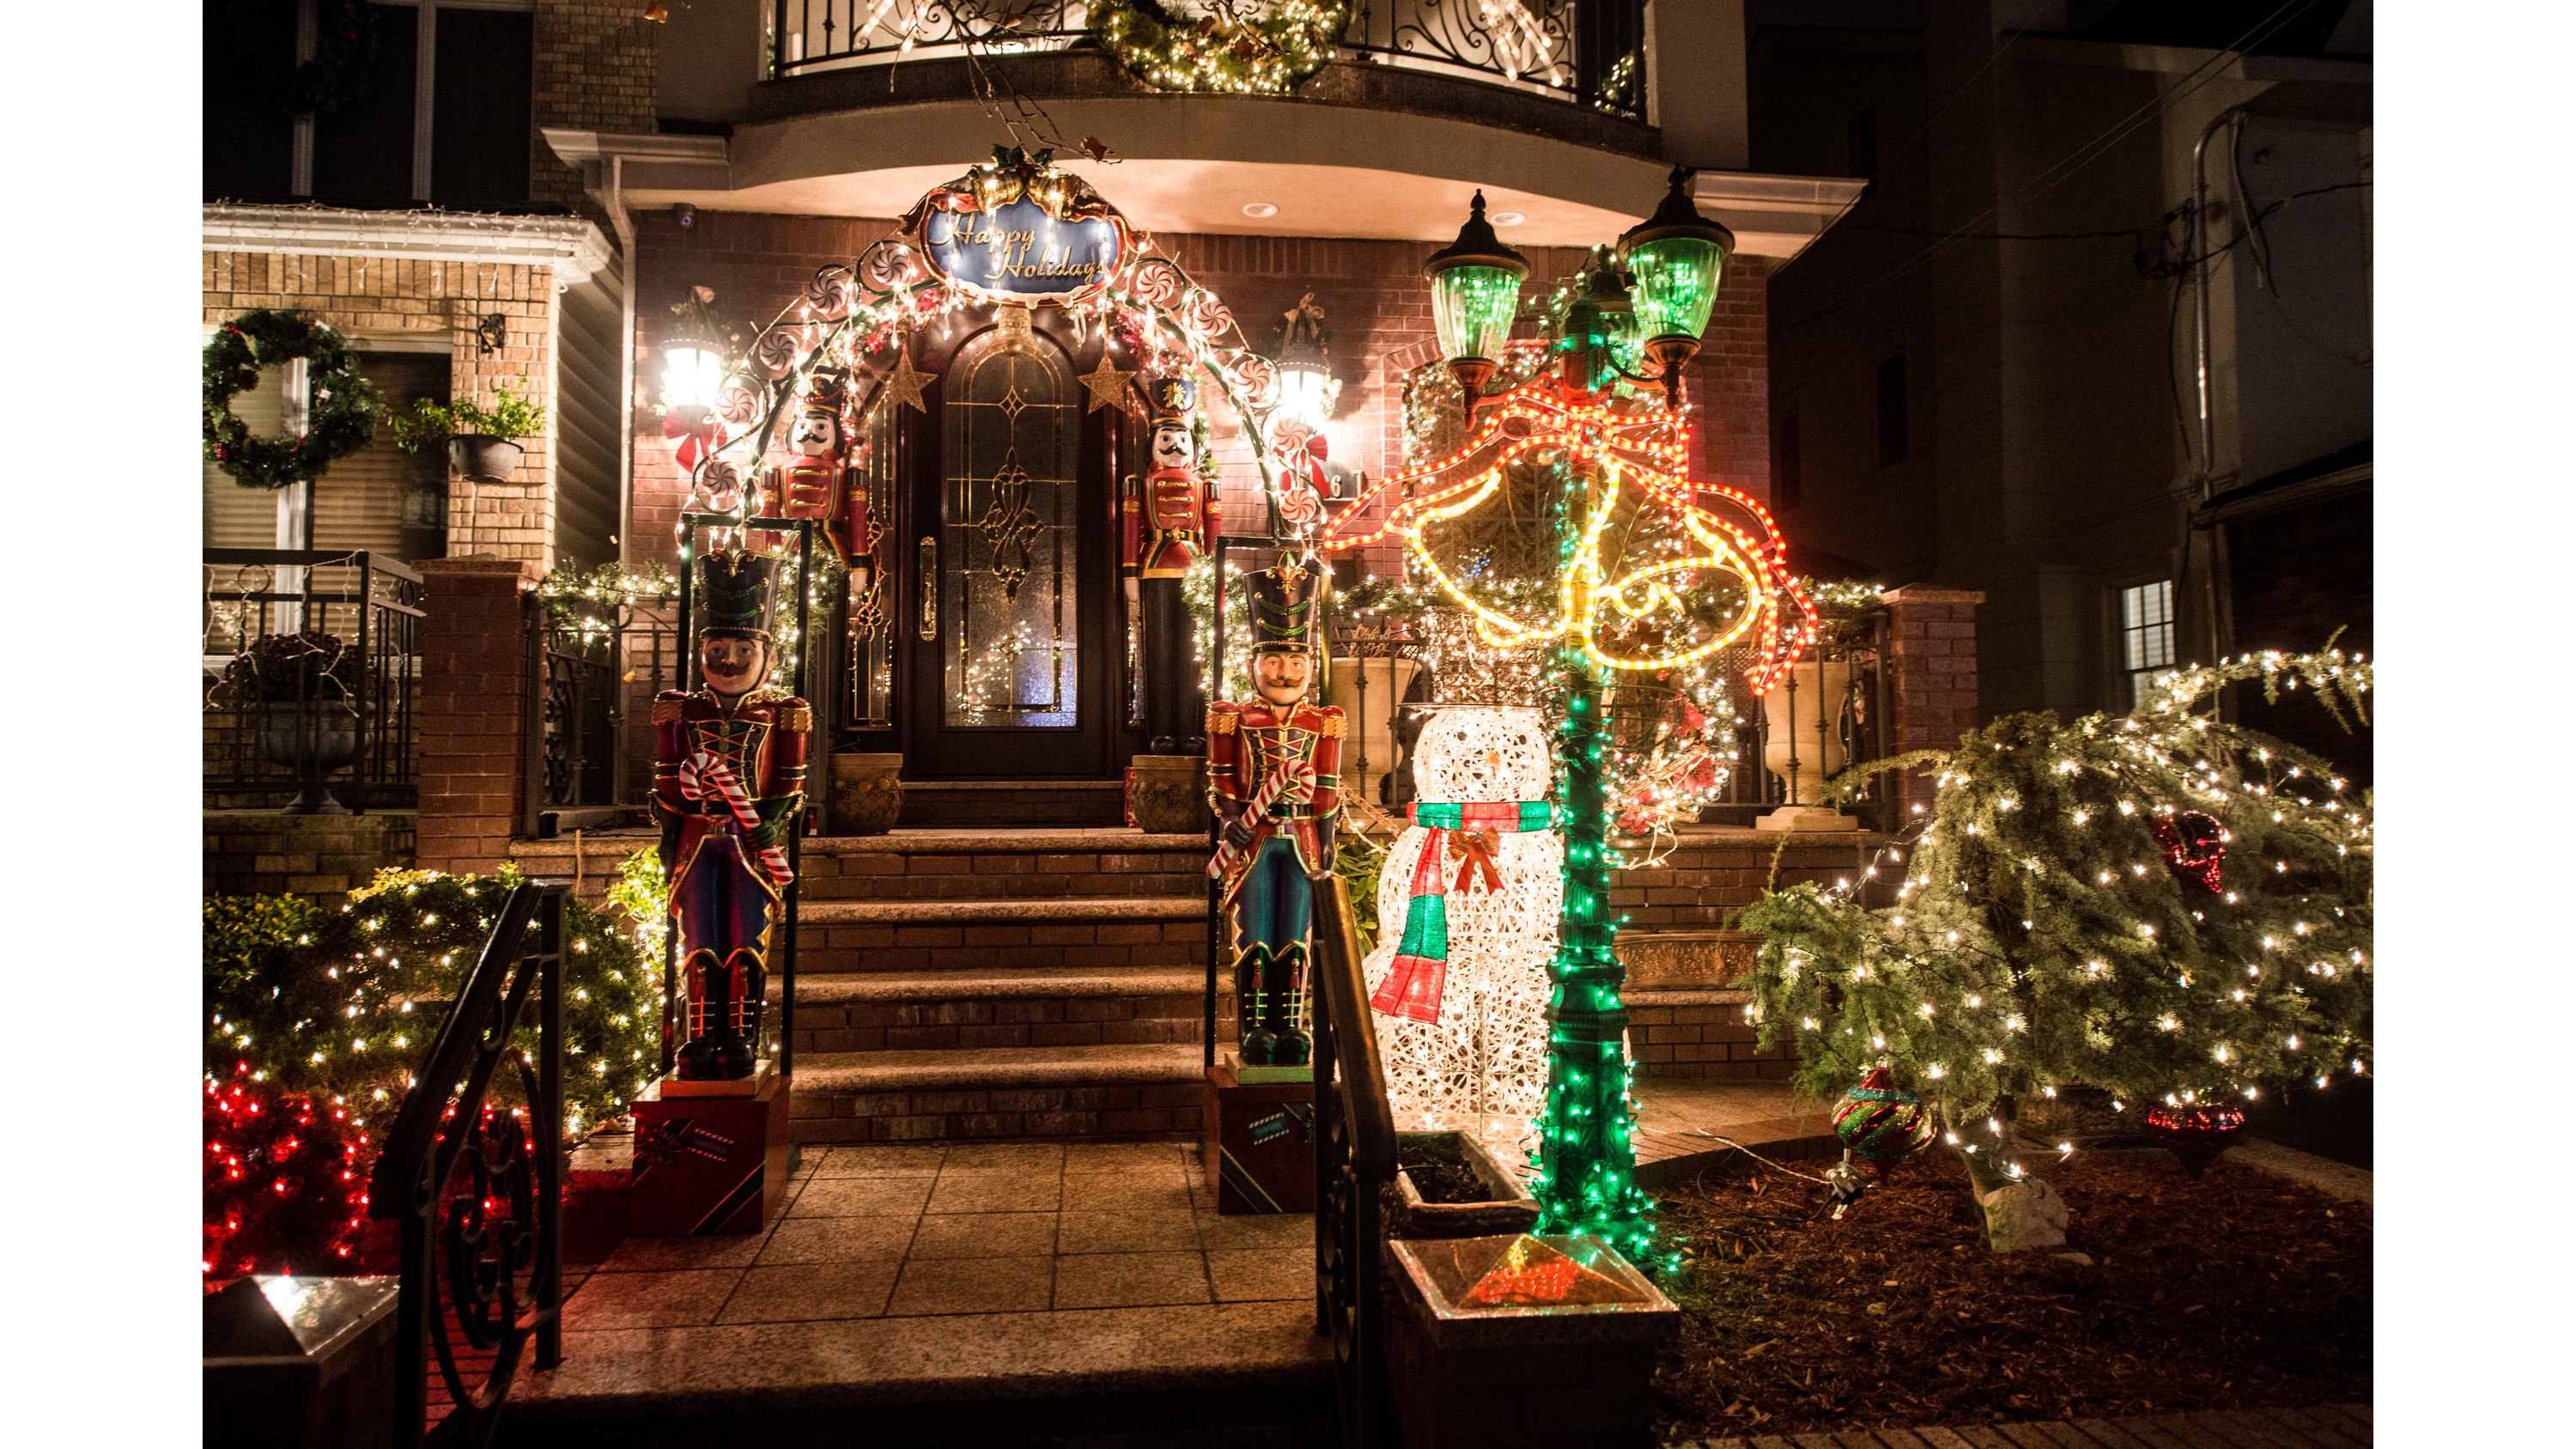 Stunning photos of the Dyker Heights Christmas lights